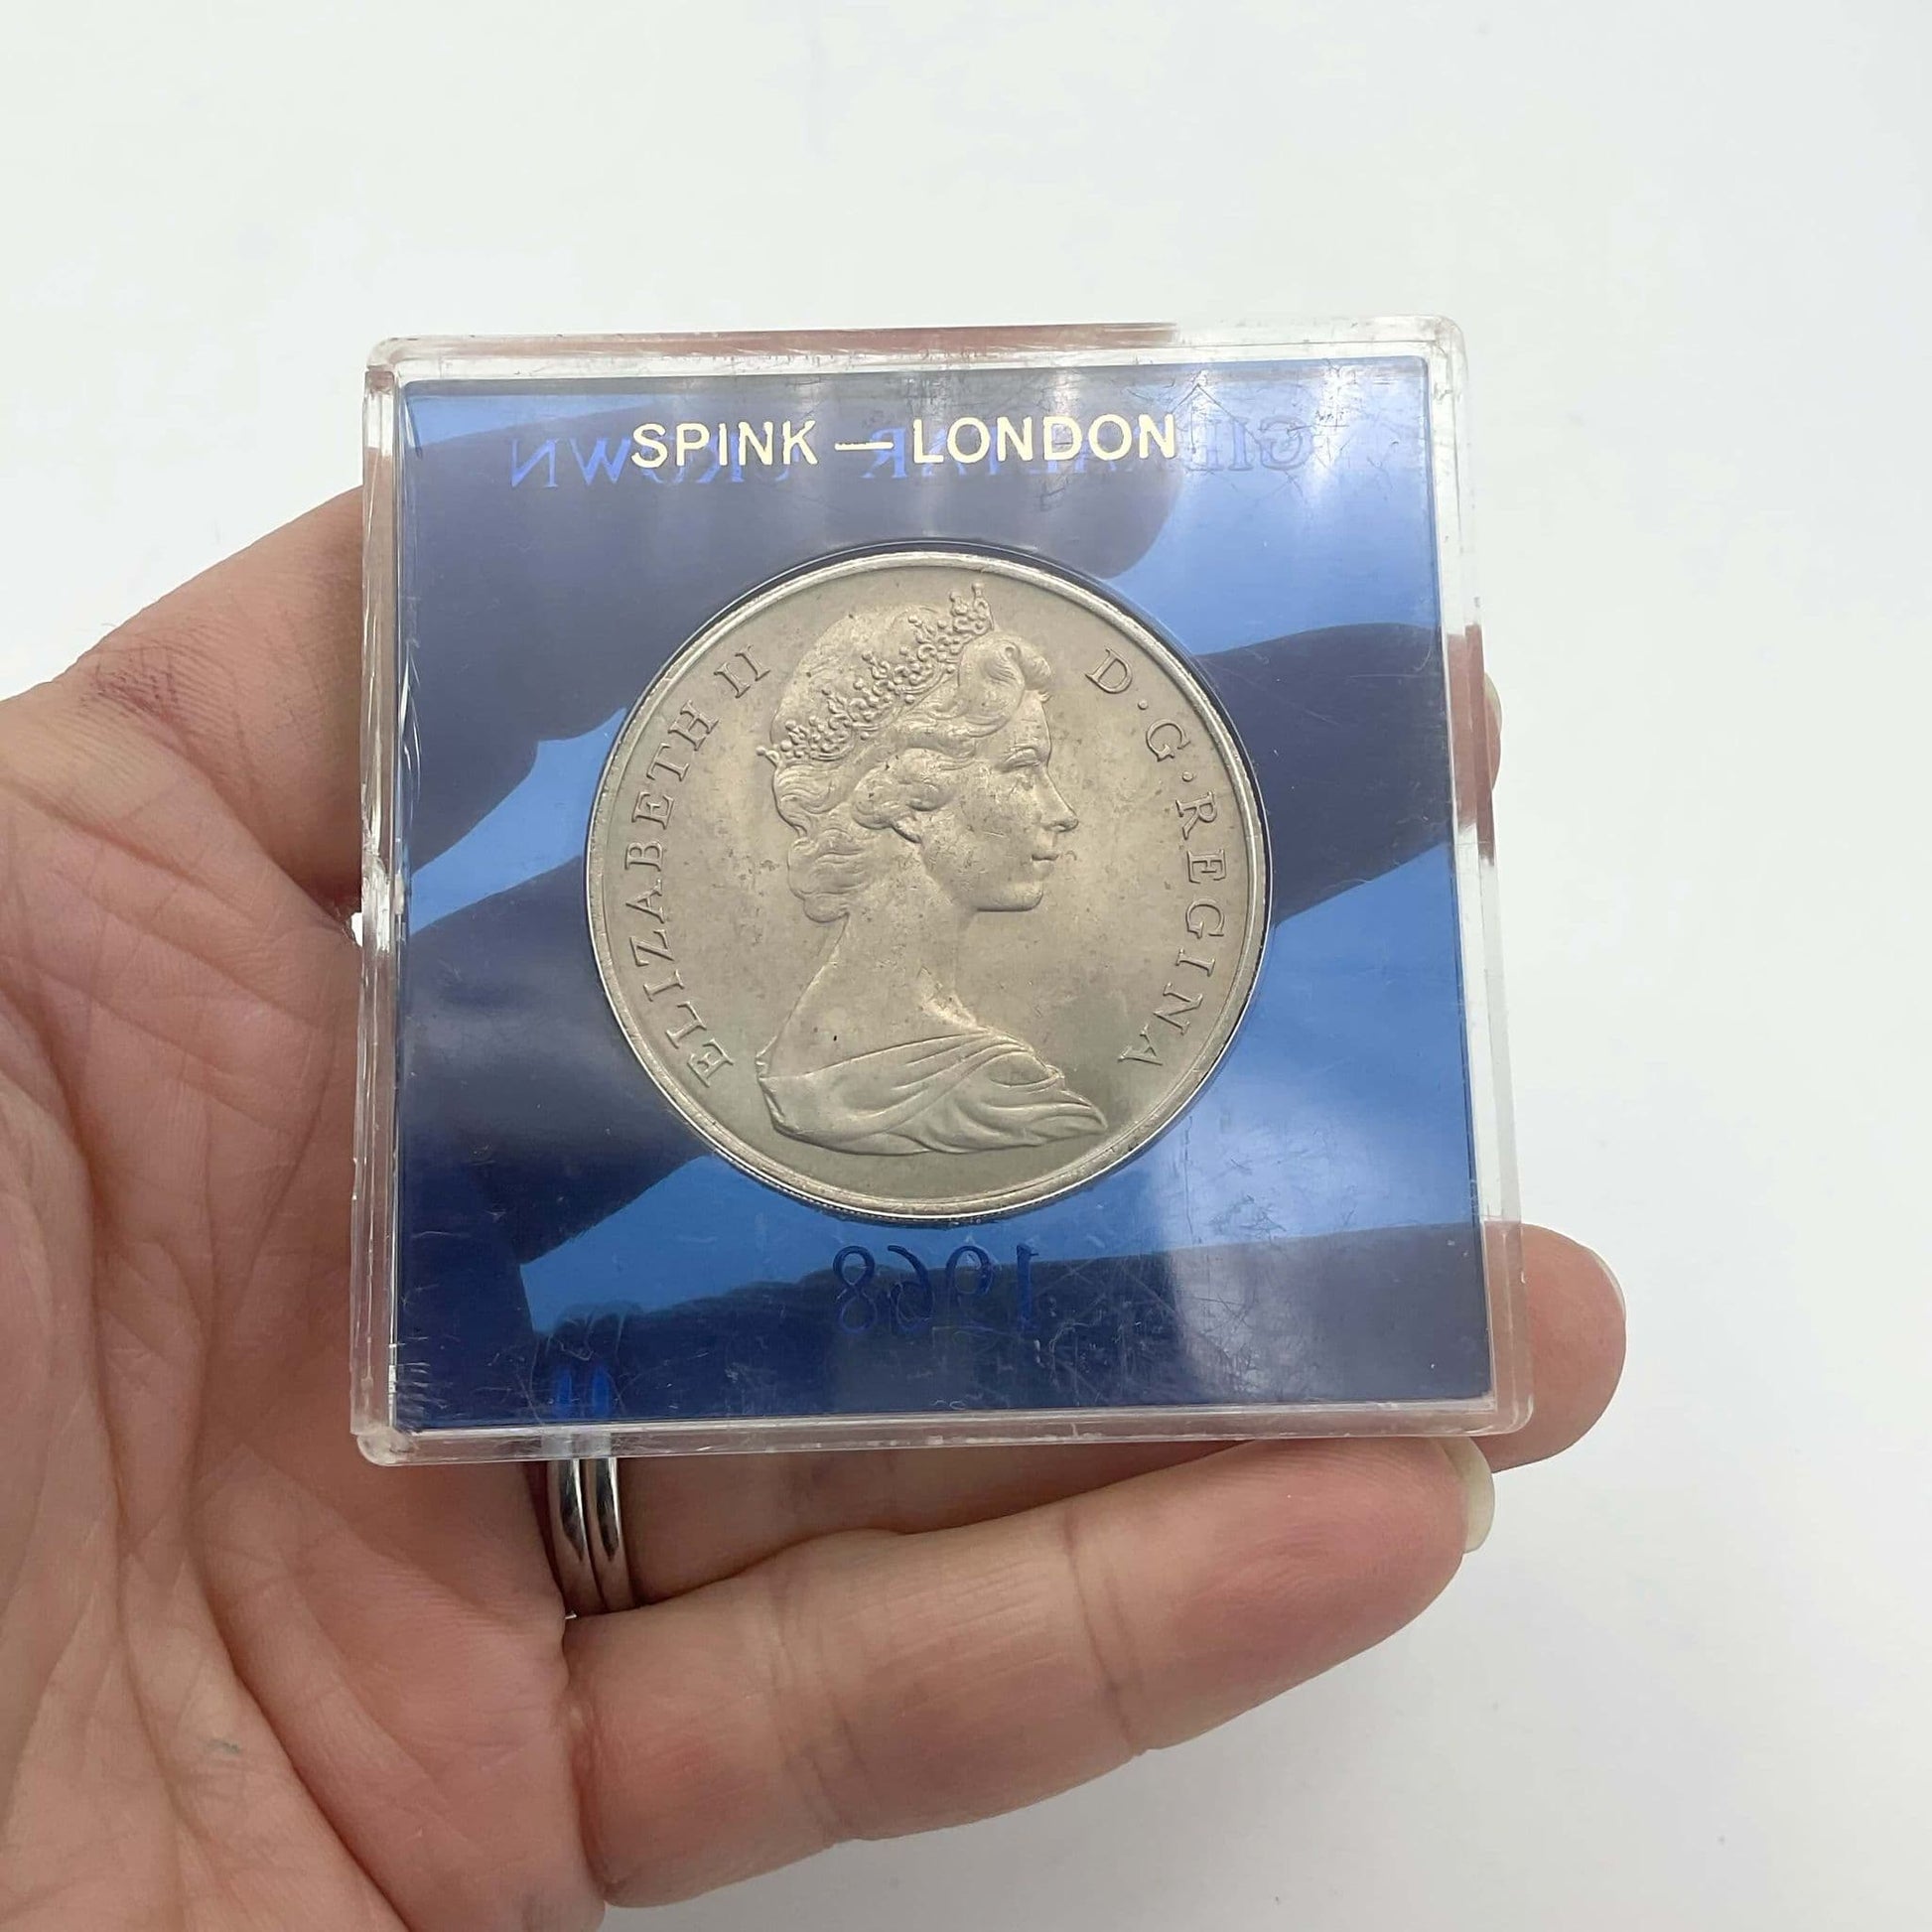 Silver Gibraltar Crown coin in a blue case held in a hand